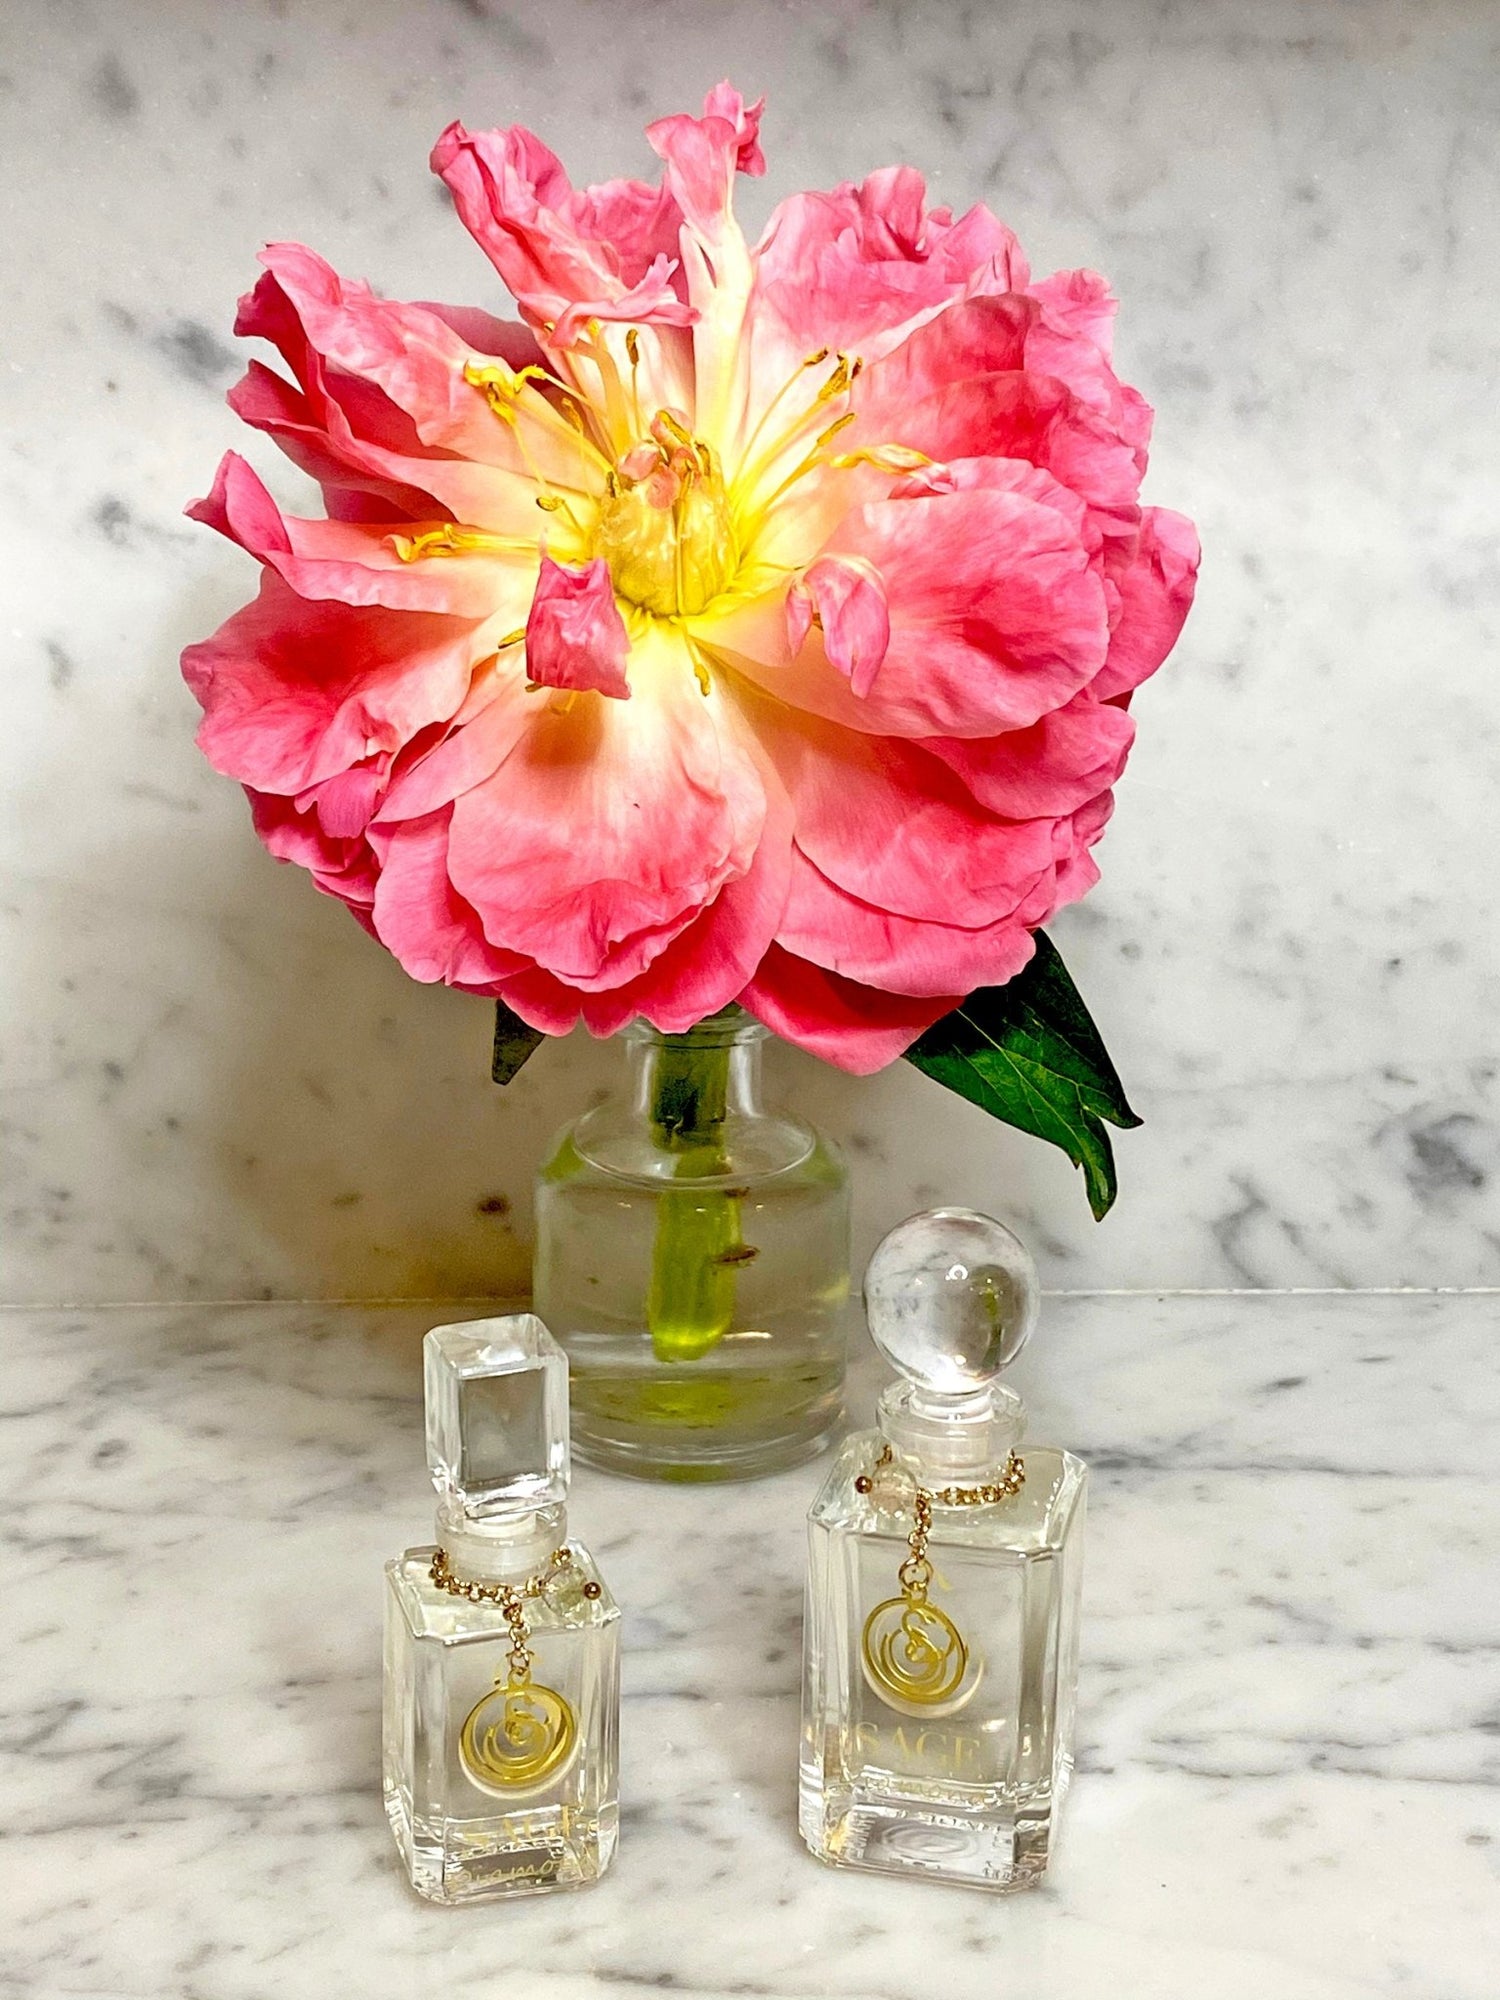 Mesmerizing dried flower fragrance at Extraordinary Prices 